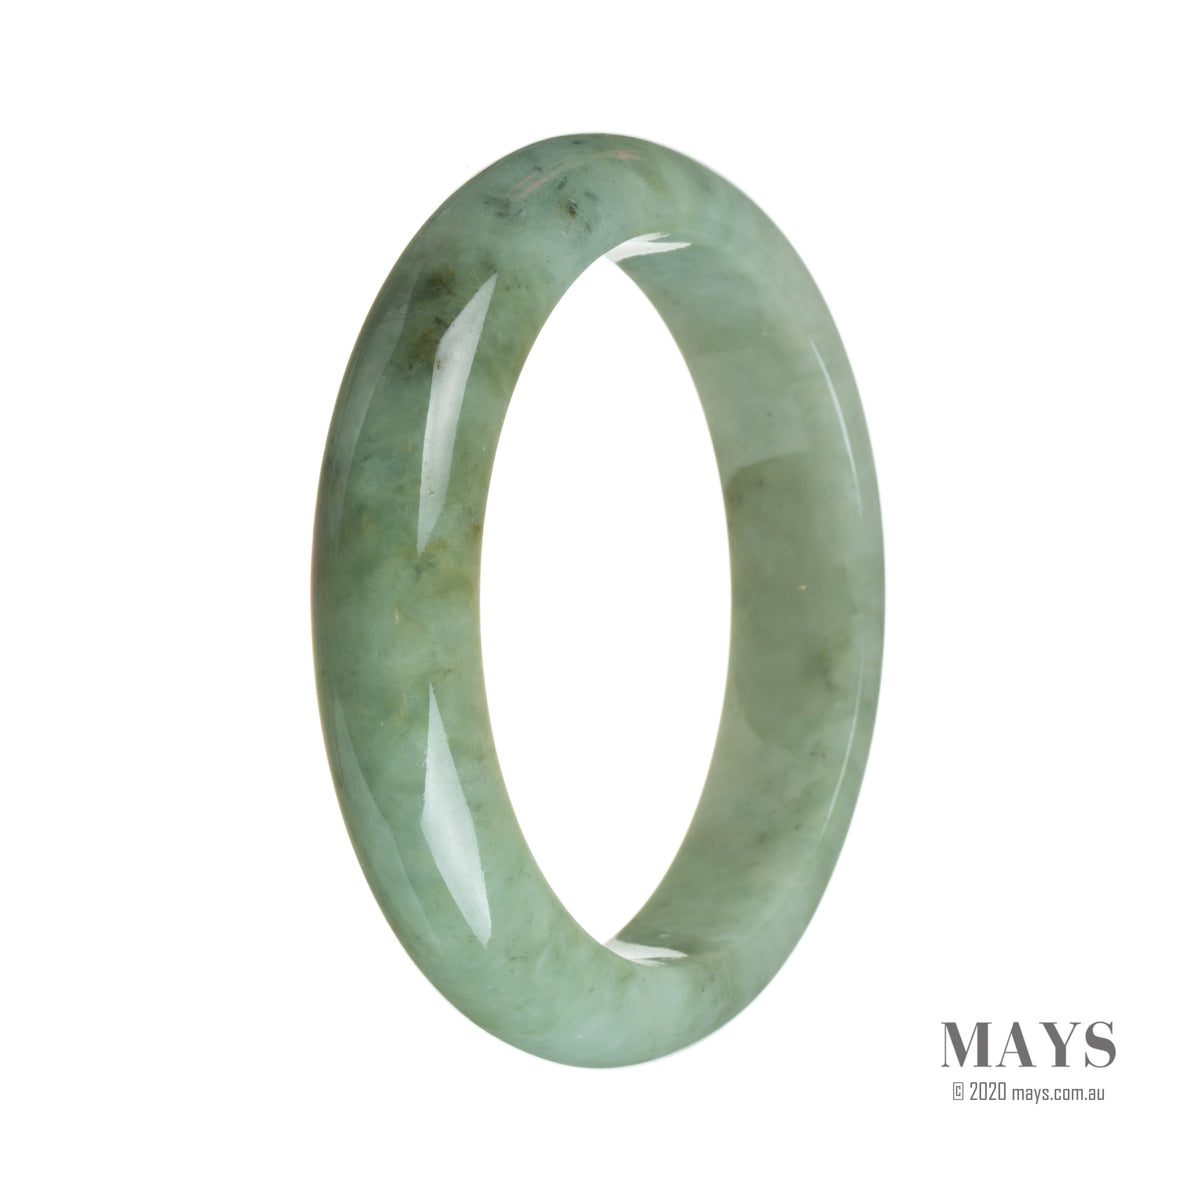 A light green traditional jade bangle bracelet, certified Type A, with a semi-round shape and a diameter of 60mm. Sold by MAYS.